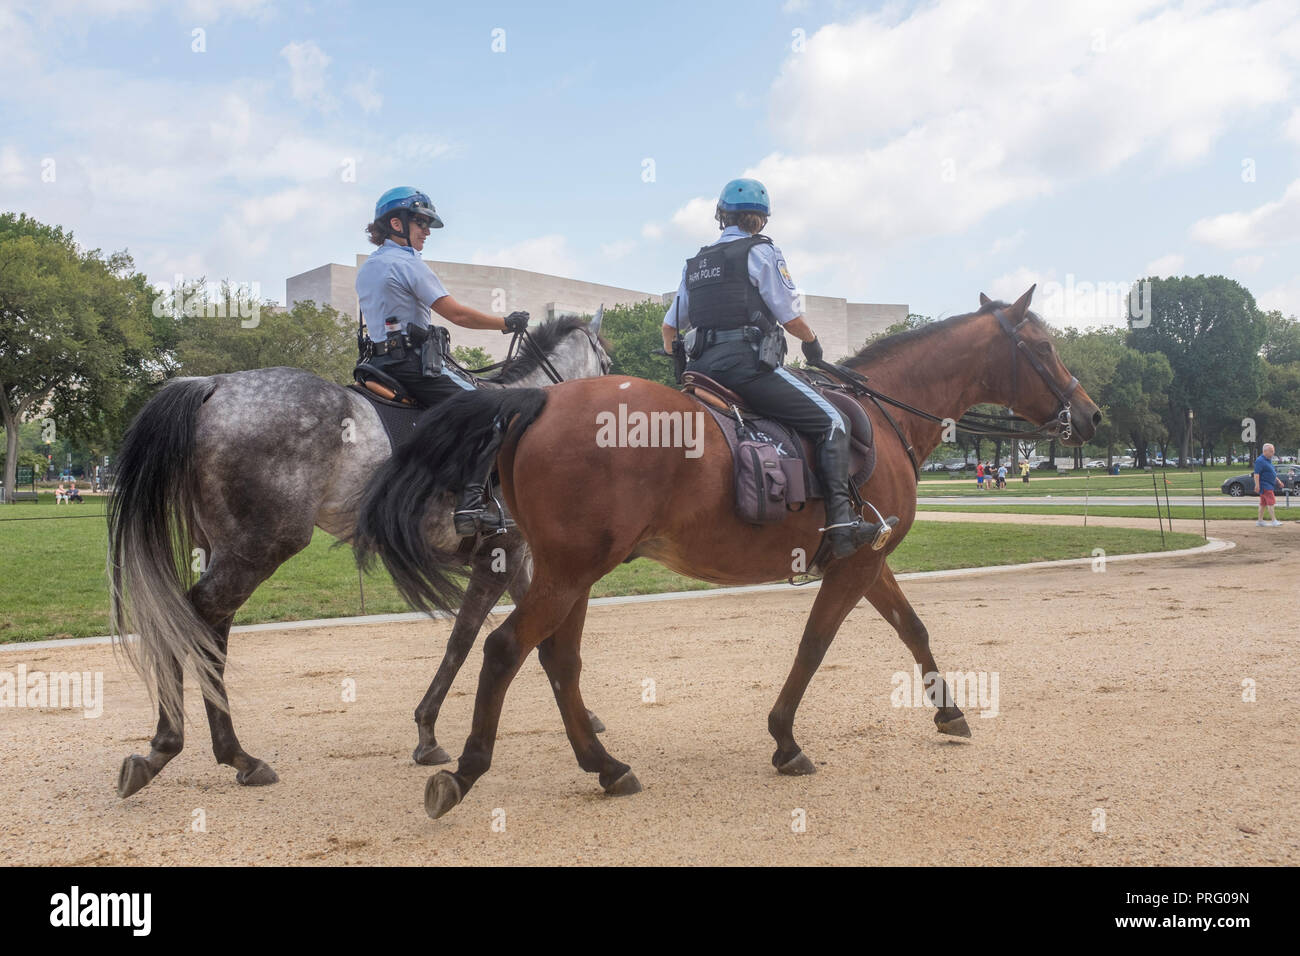 Mounted U.S. Park Police patrol the National Mall in Washington, DC. National Gallery of Art is in the background. Stock Photo